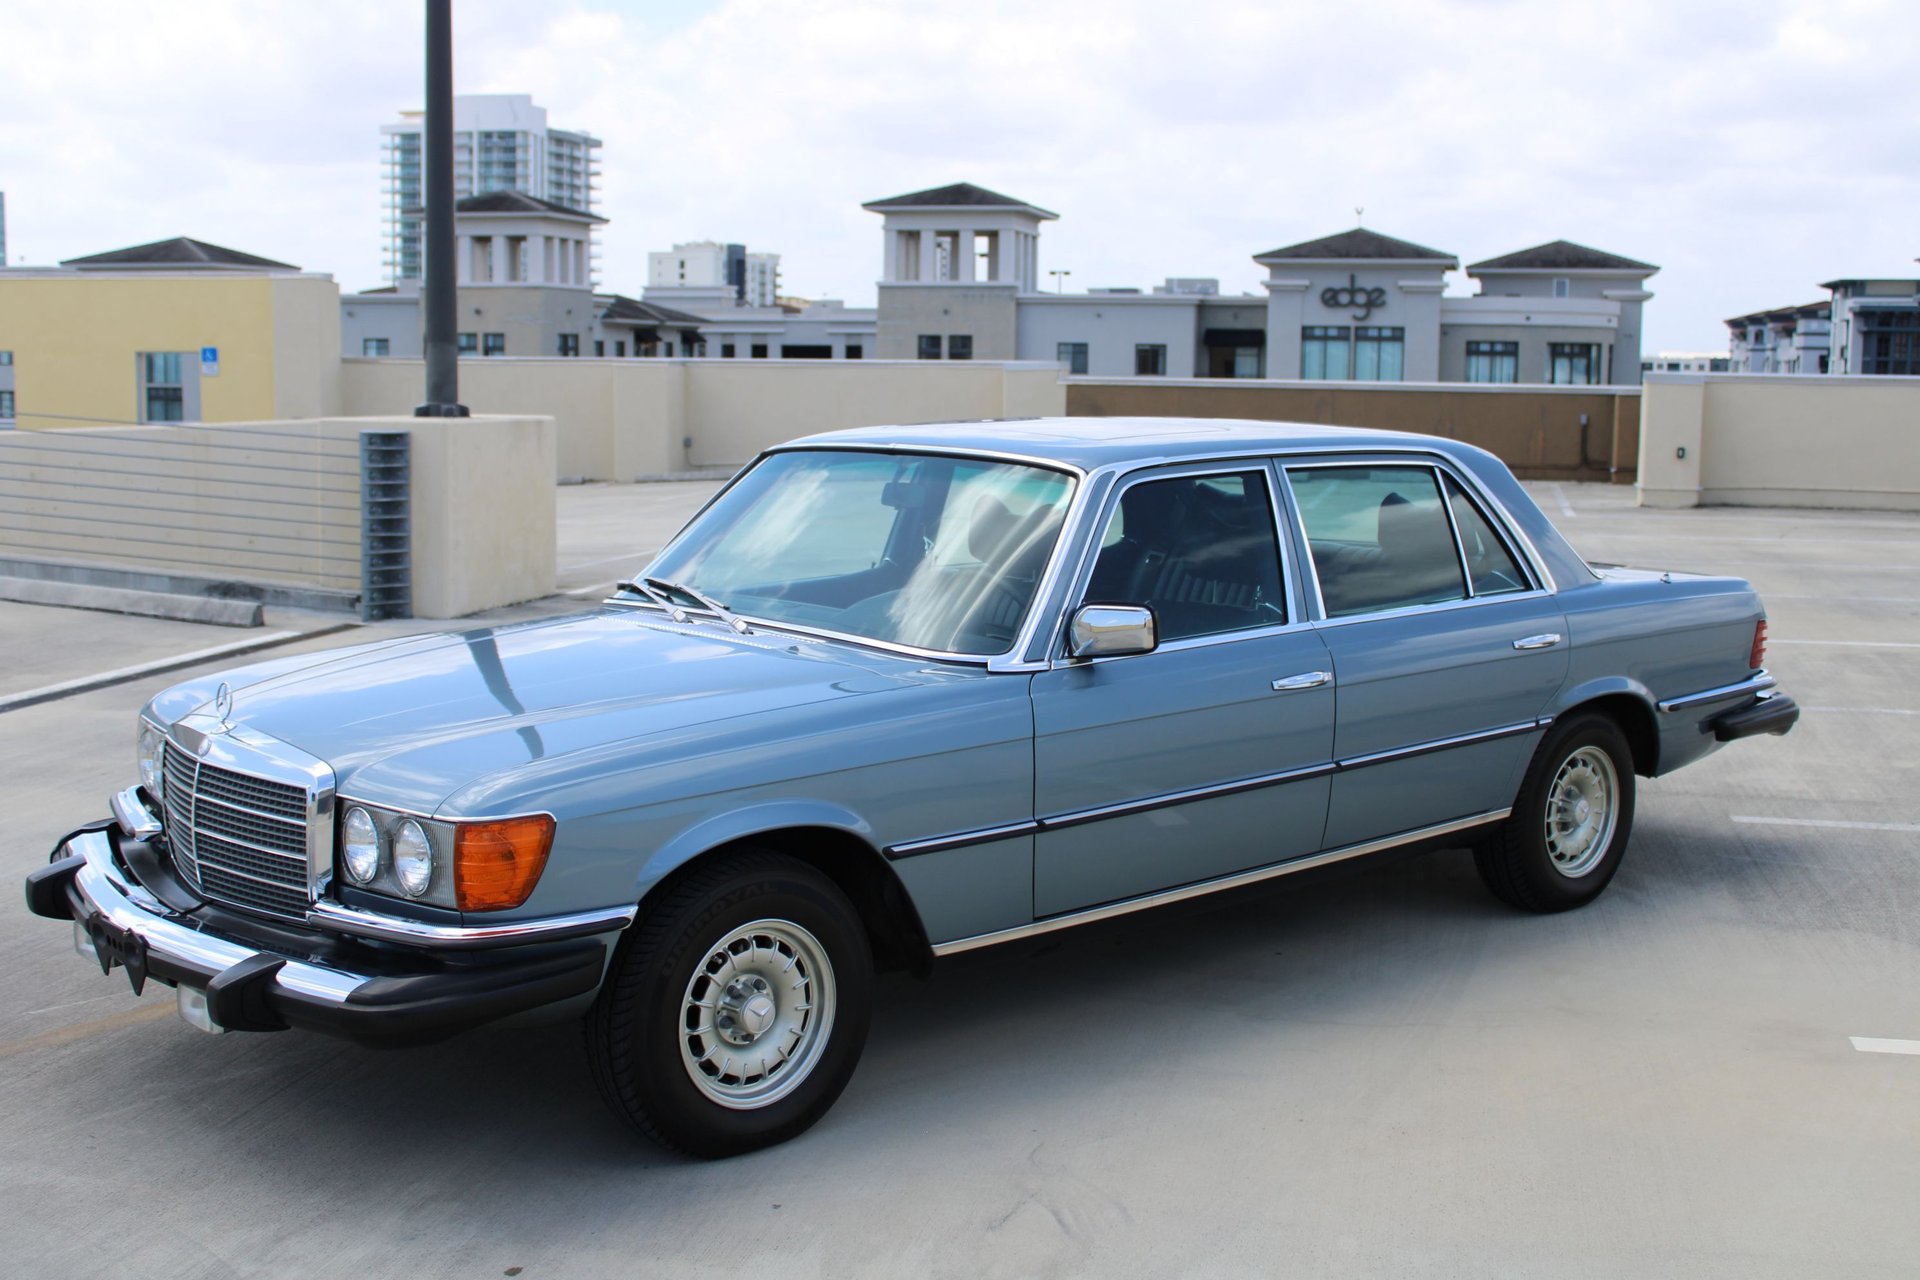 mercedes 450 sel used – Search for your used car on the parking